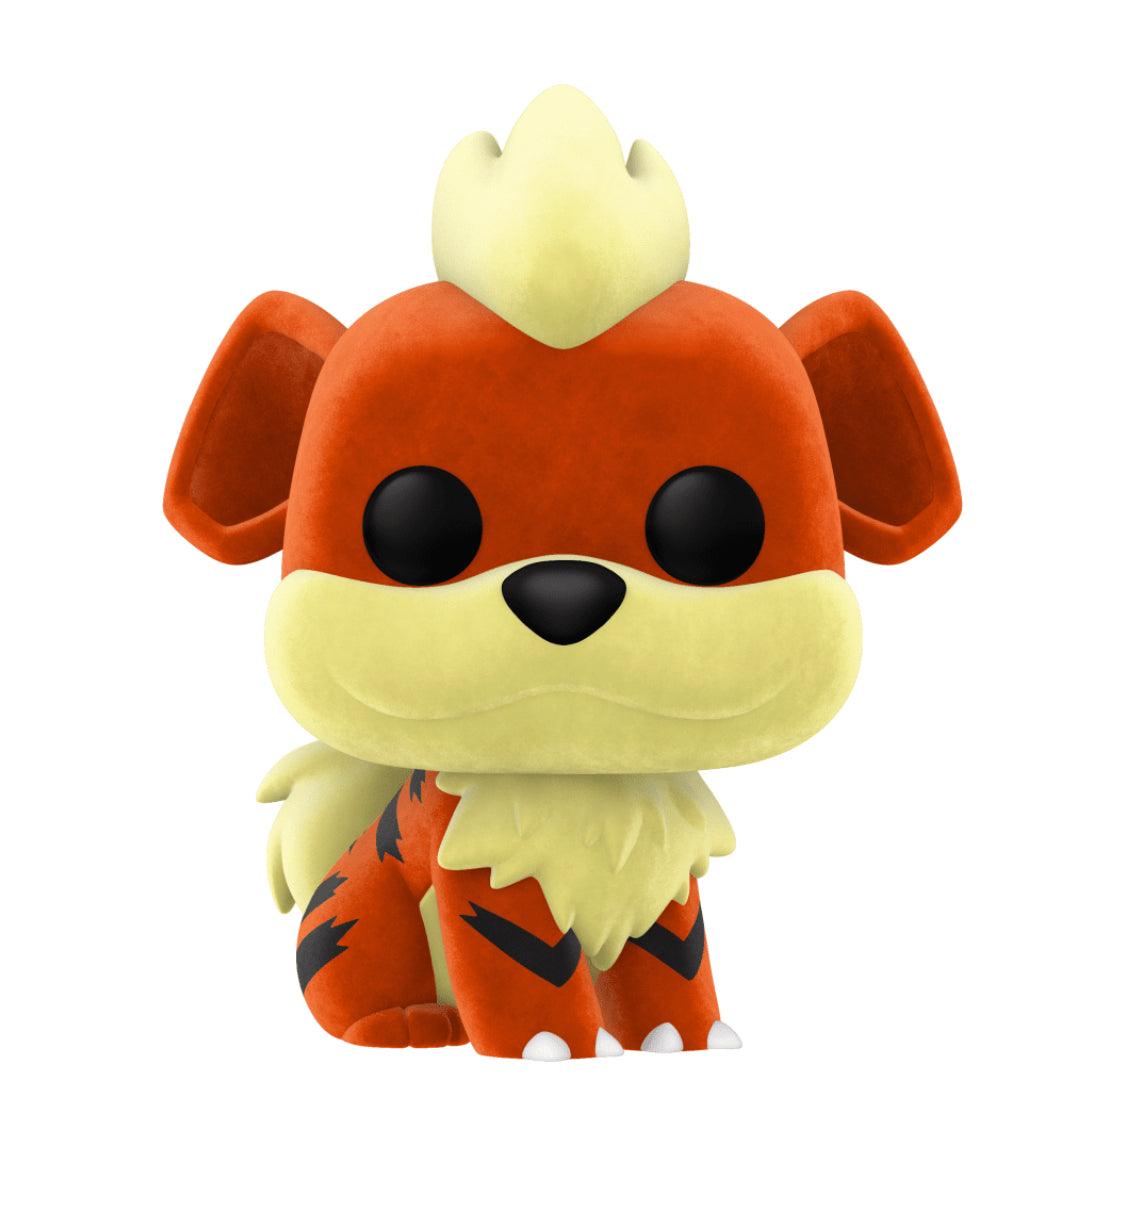 Pop! Games - Pokemon - Growlithe - #597 - Flocked & EXCLUSIVE 2020 New York Comic Con LIMITED Edition - Hobby Champion Inc